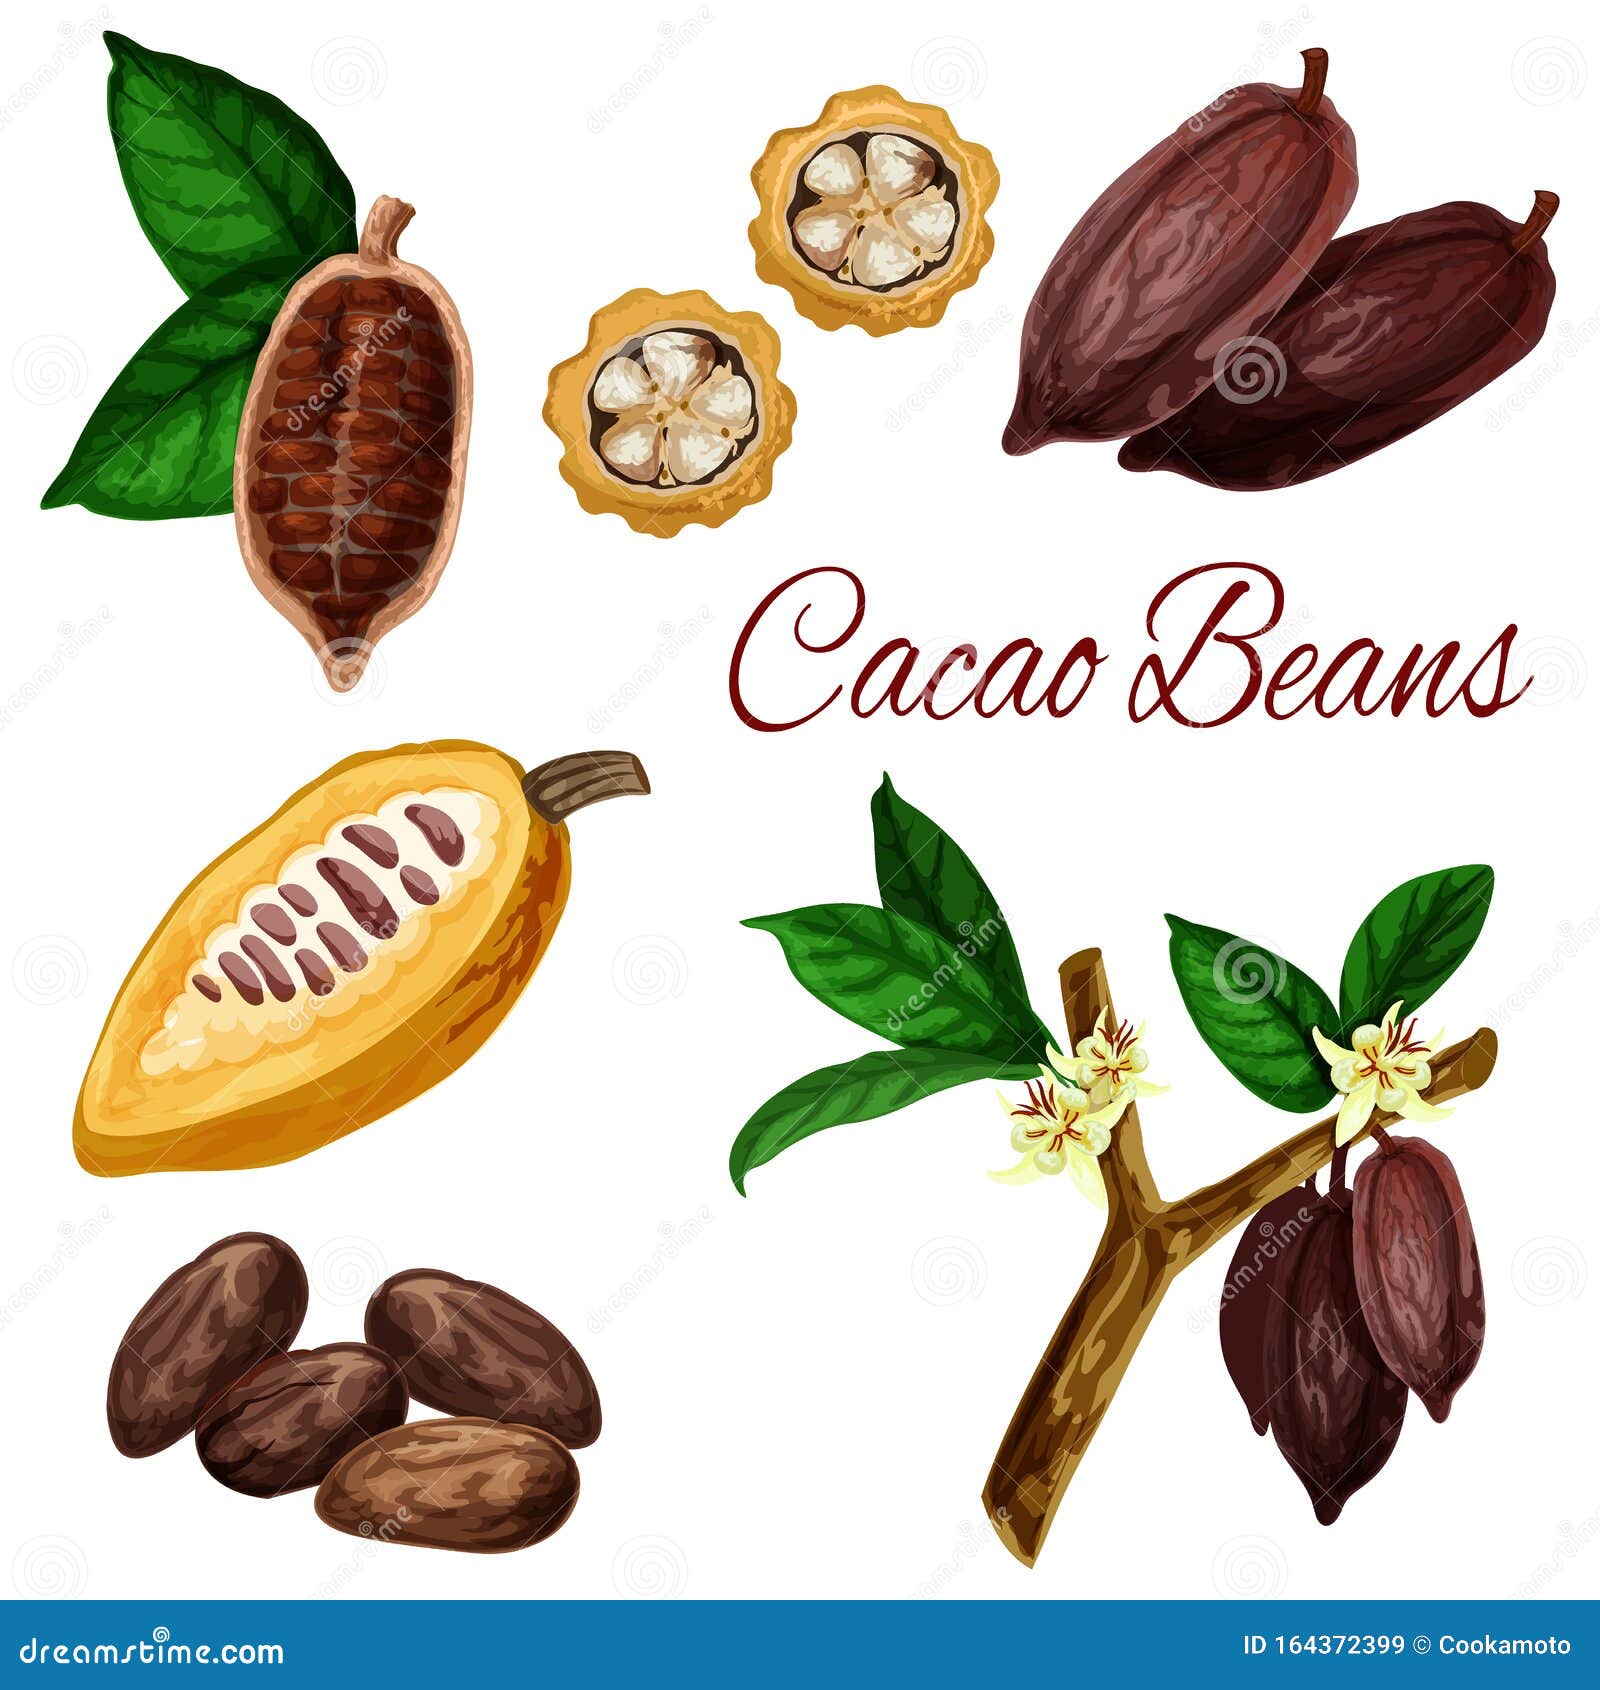 cocoa beans, cacao pod plant, chocolate ingredient